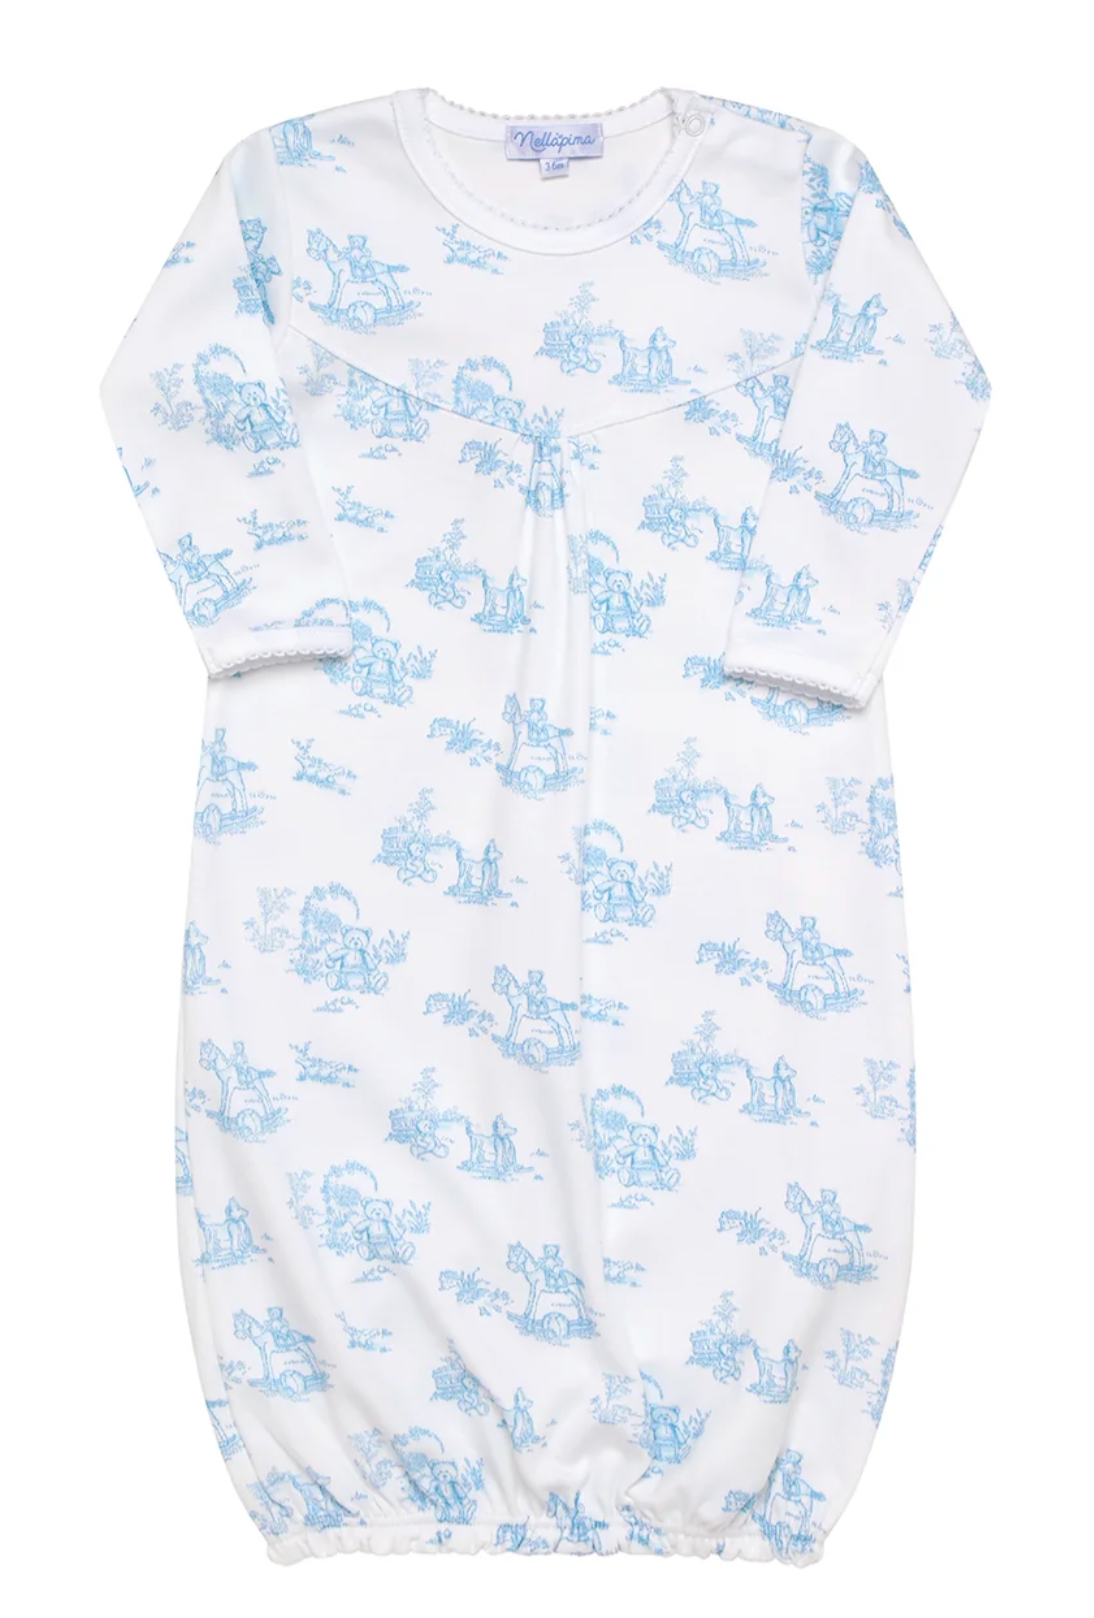 Nellapima Blue Toile Baby Gown